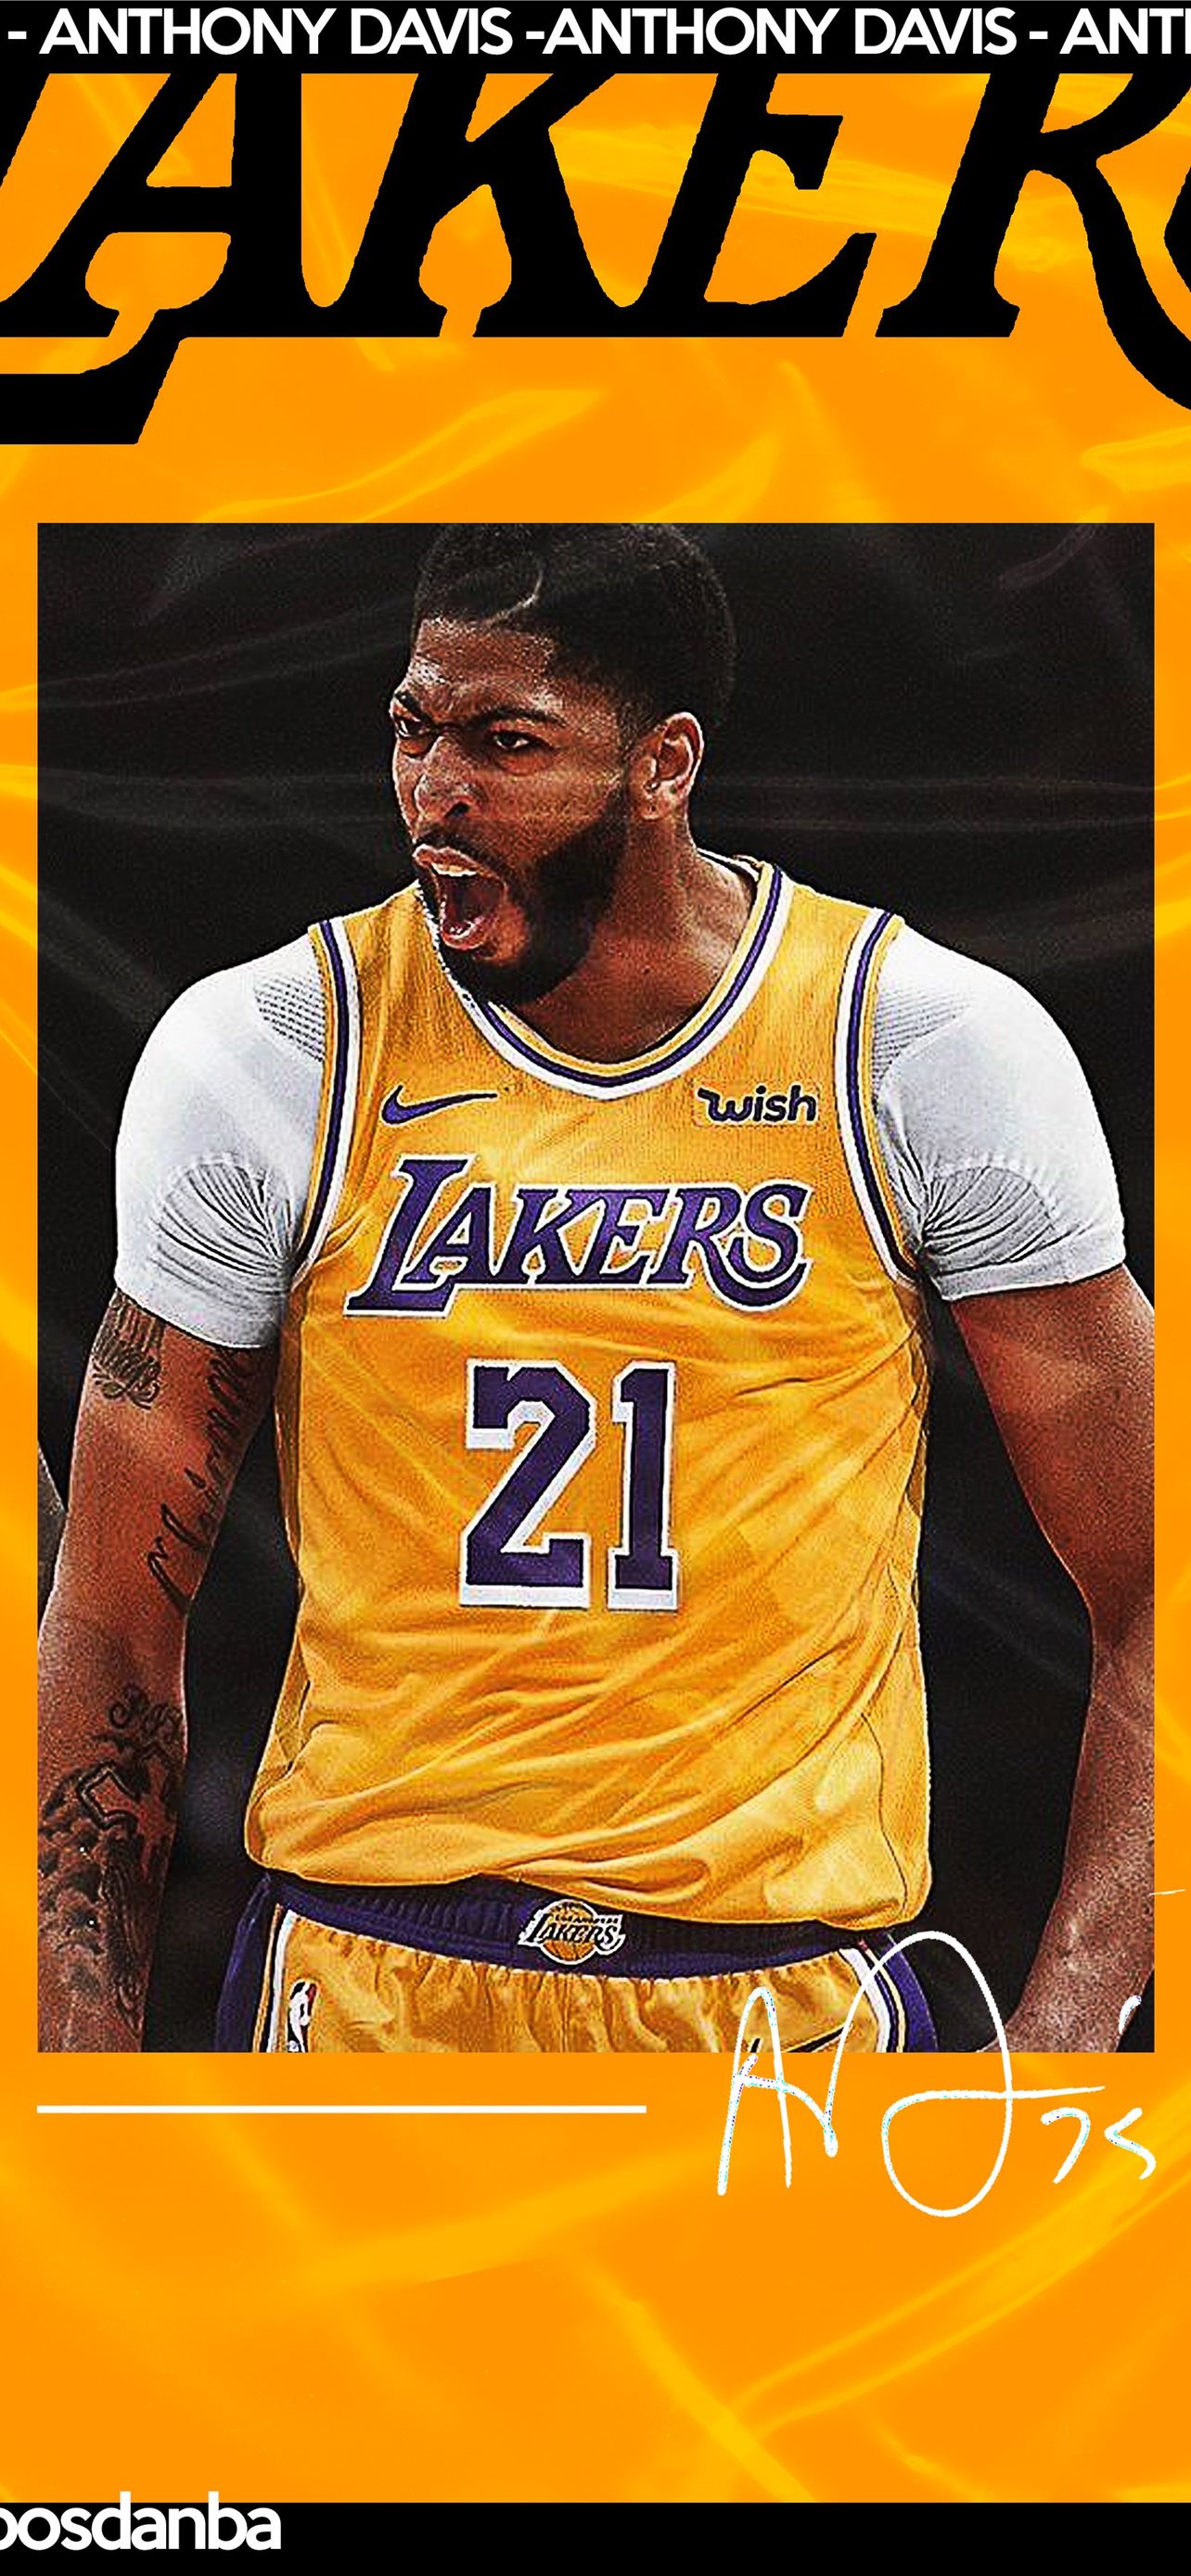 Lebron James Anthony Davis Digital Art Painting Le iPhone 11 Wallpapers  Free Download